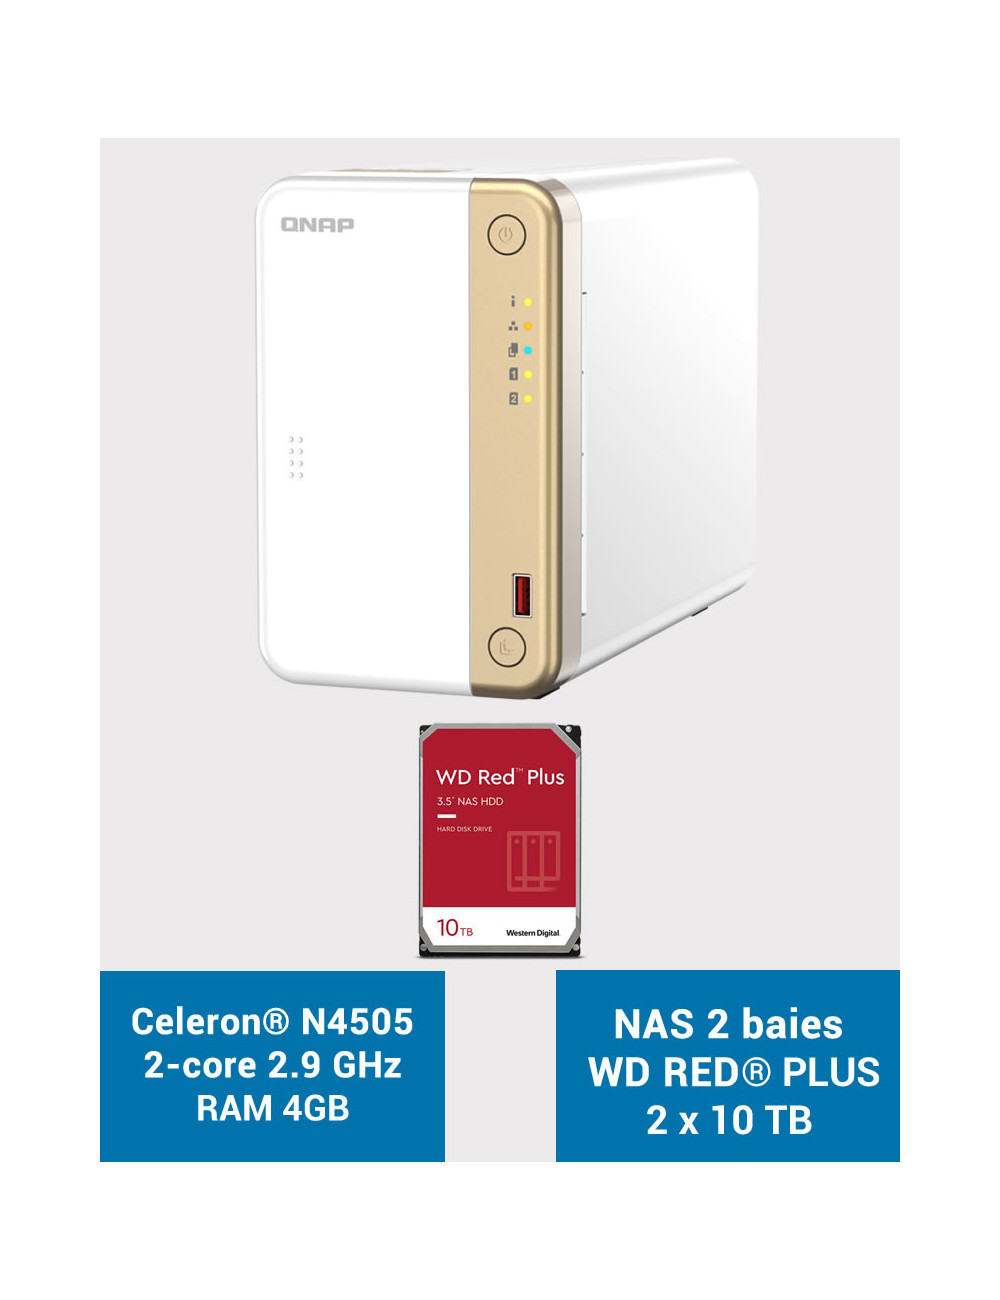 QNAP TS-262 4GB Serveur NAS WD RED PLUS 20To (2x10To)